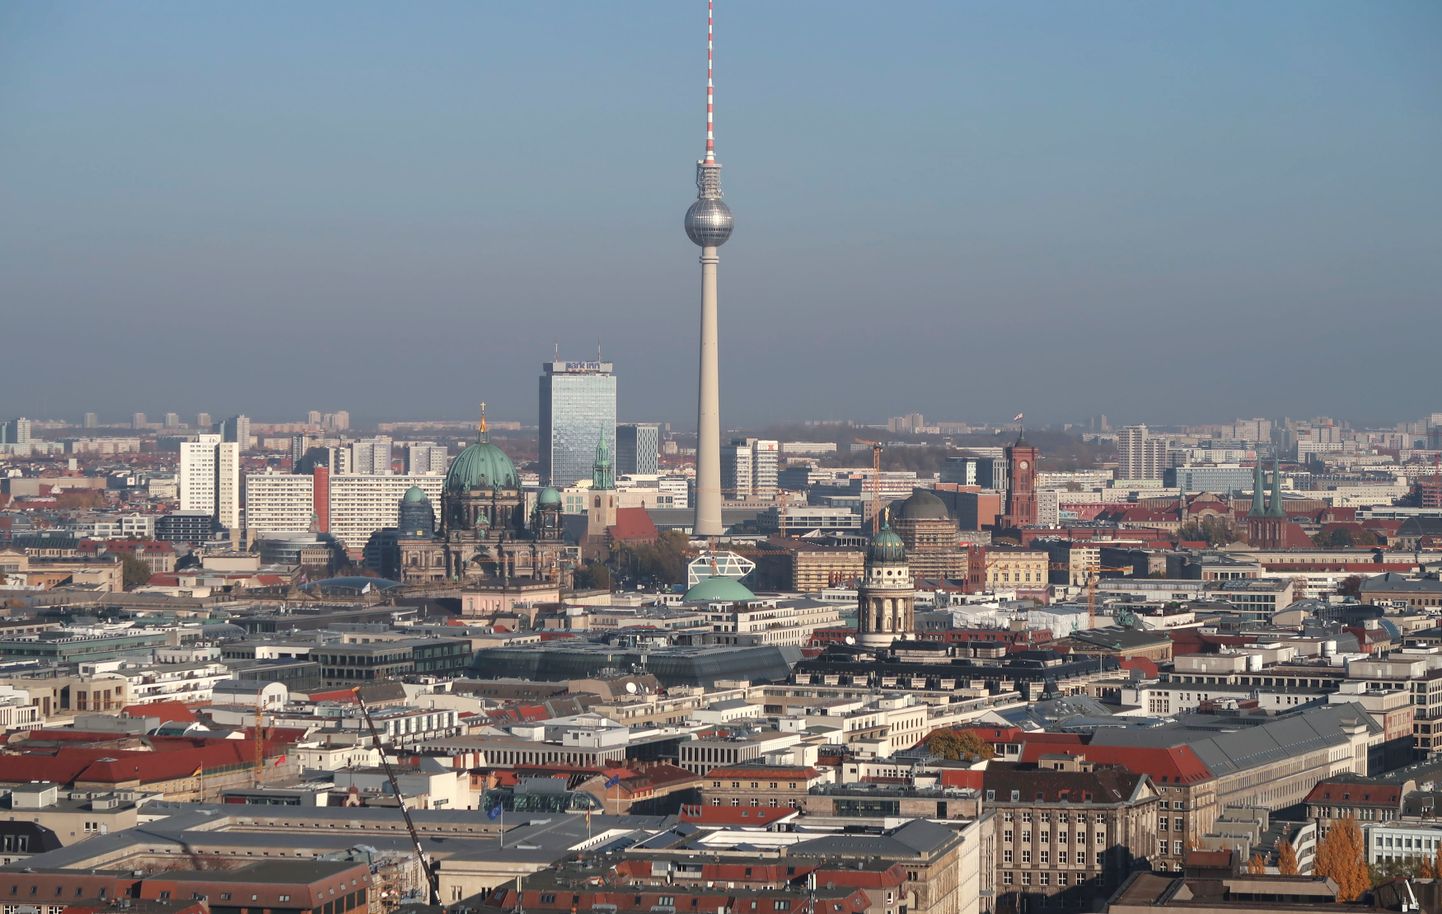 A general view shows the skyline of the East city center with the TV tower in Berlin, Germany, November 6, 2018.    REUTERS/Fabrizio Bensch